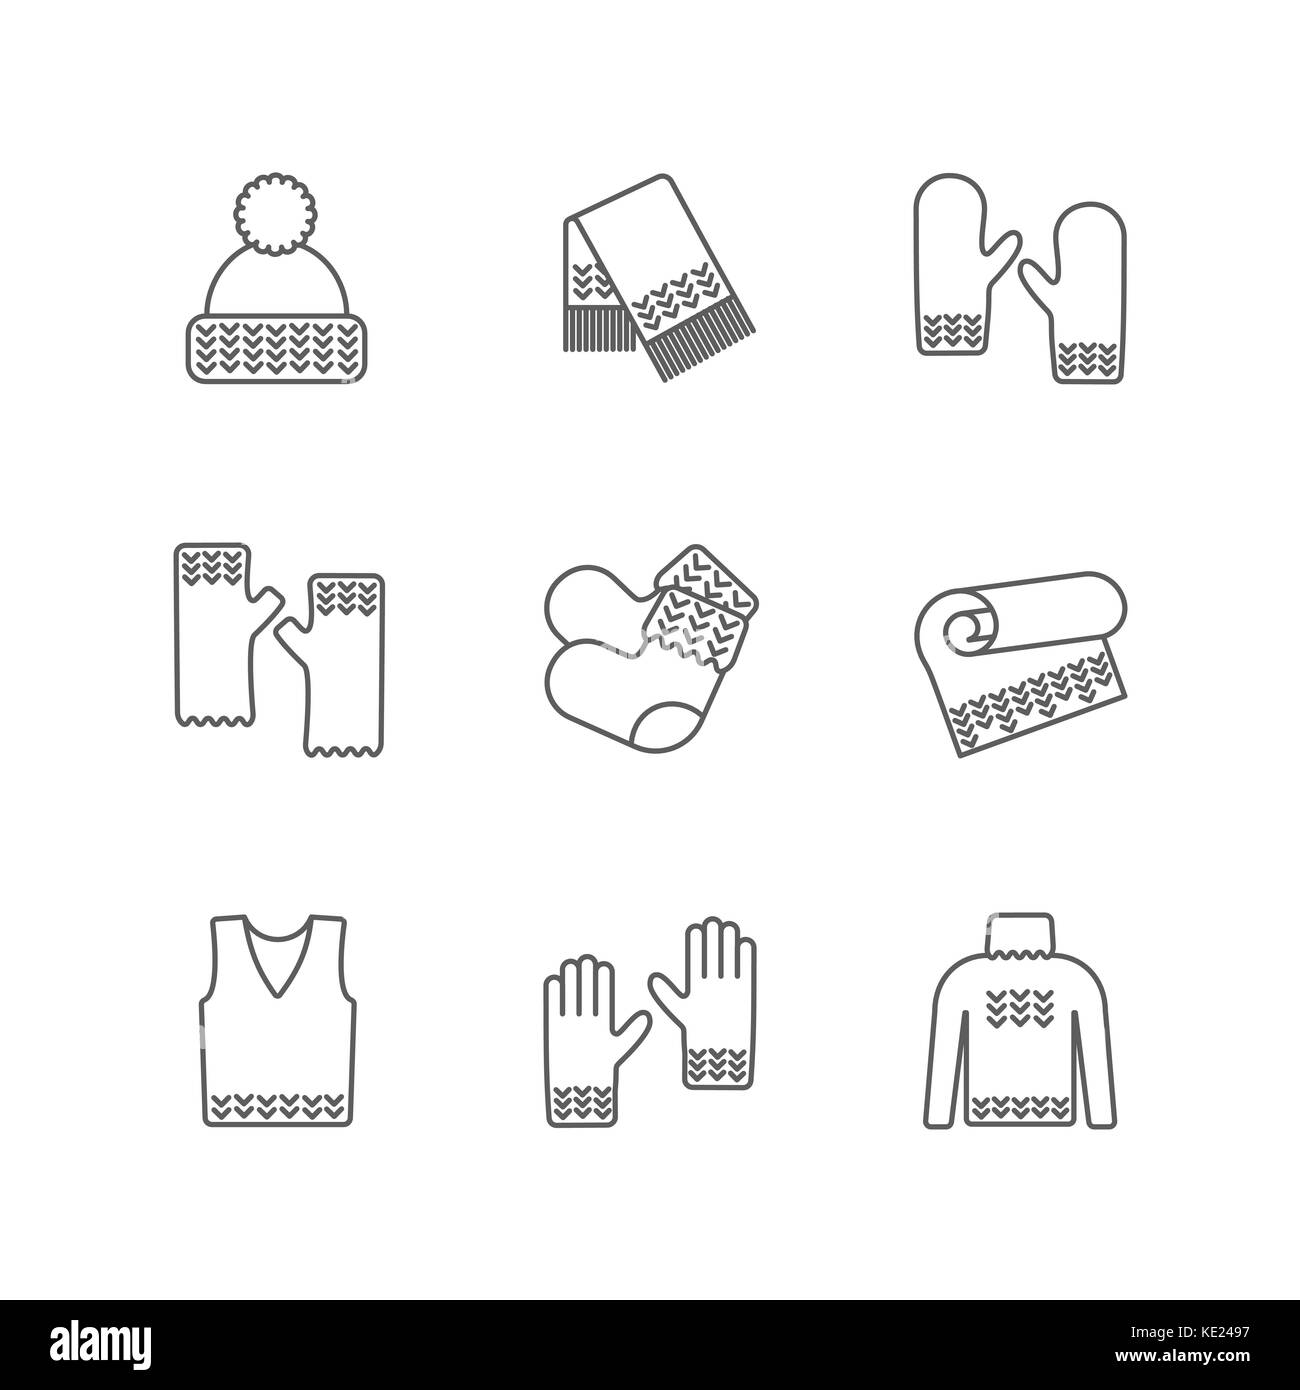 Knit winter clothes icon set. Knitting clothes, knitted samples thin line warm woolen things. Hat, scarf, mittens, waistcoat, plaid and other hand-knitted garments Stock Vector